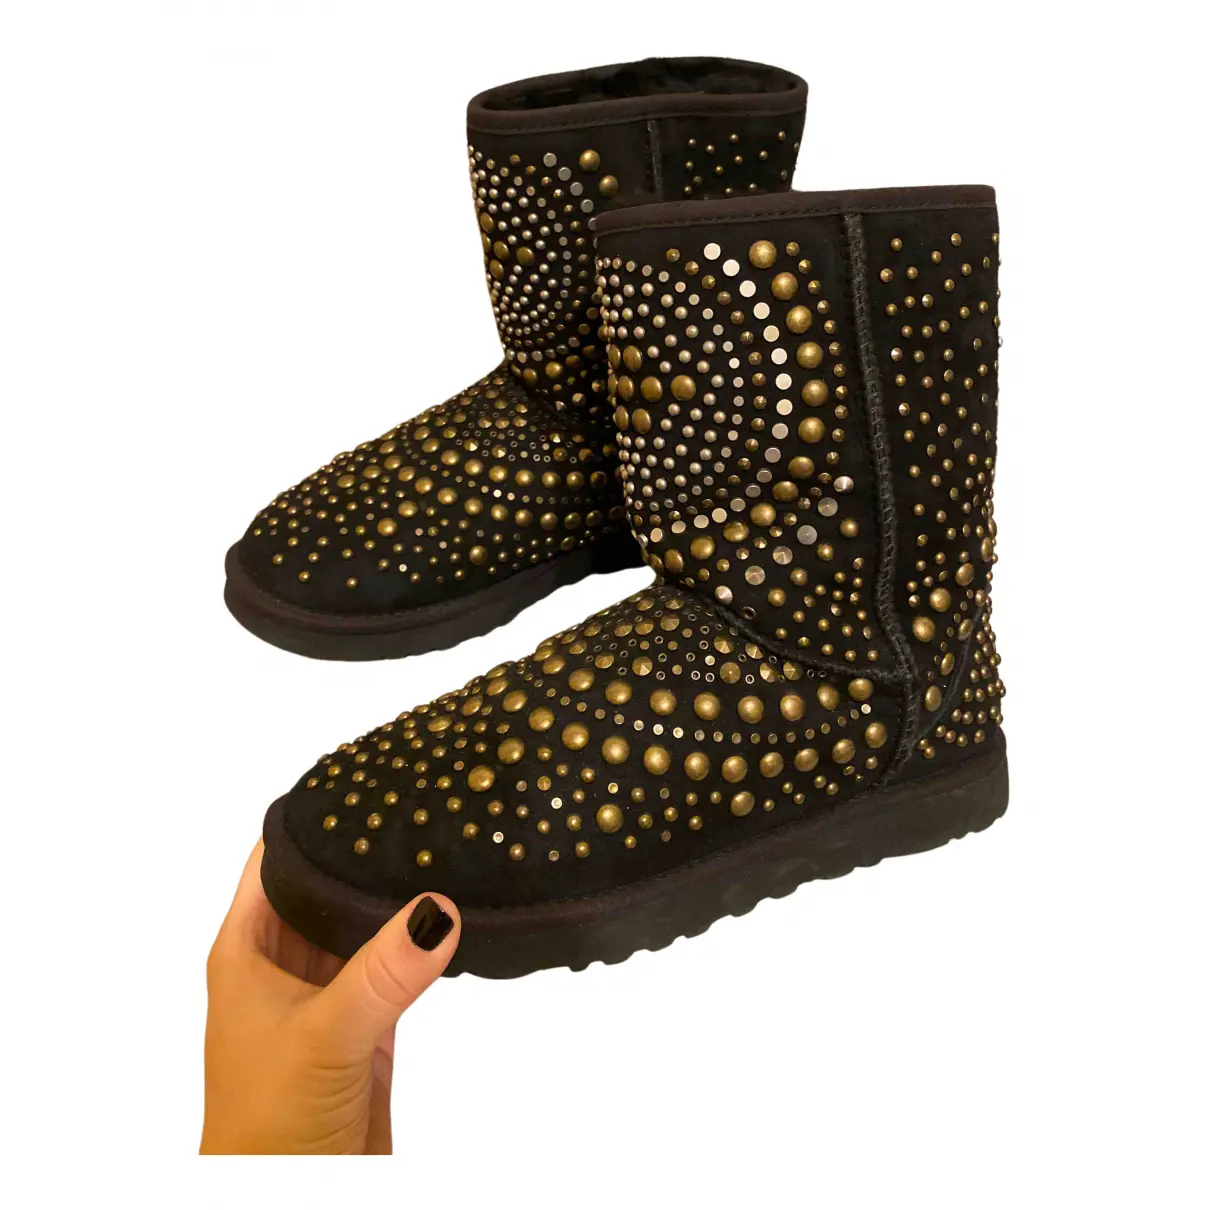 Buy Ugg & Jimmy Choo Snow boots online